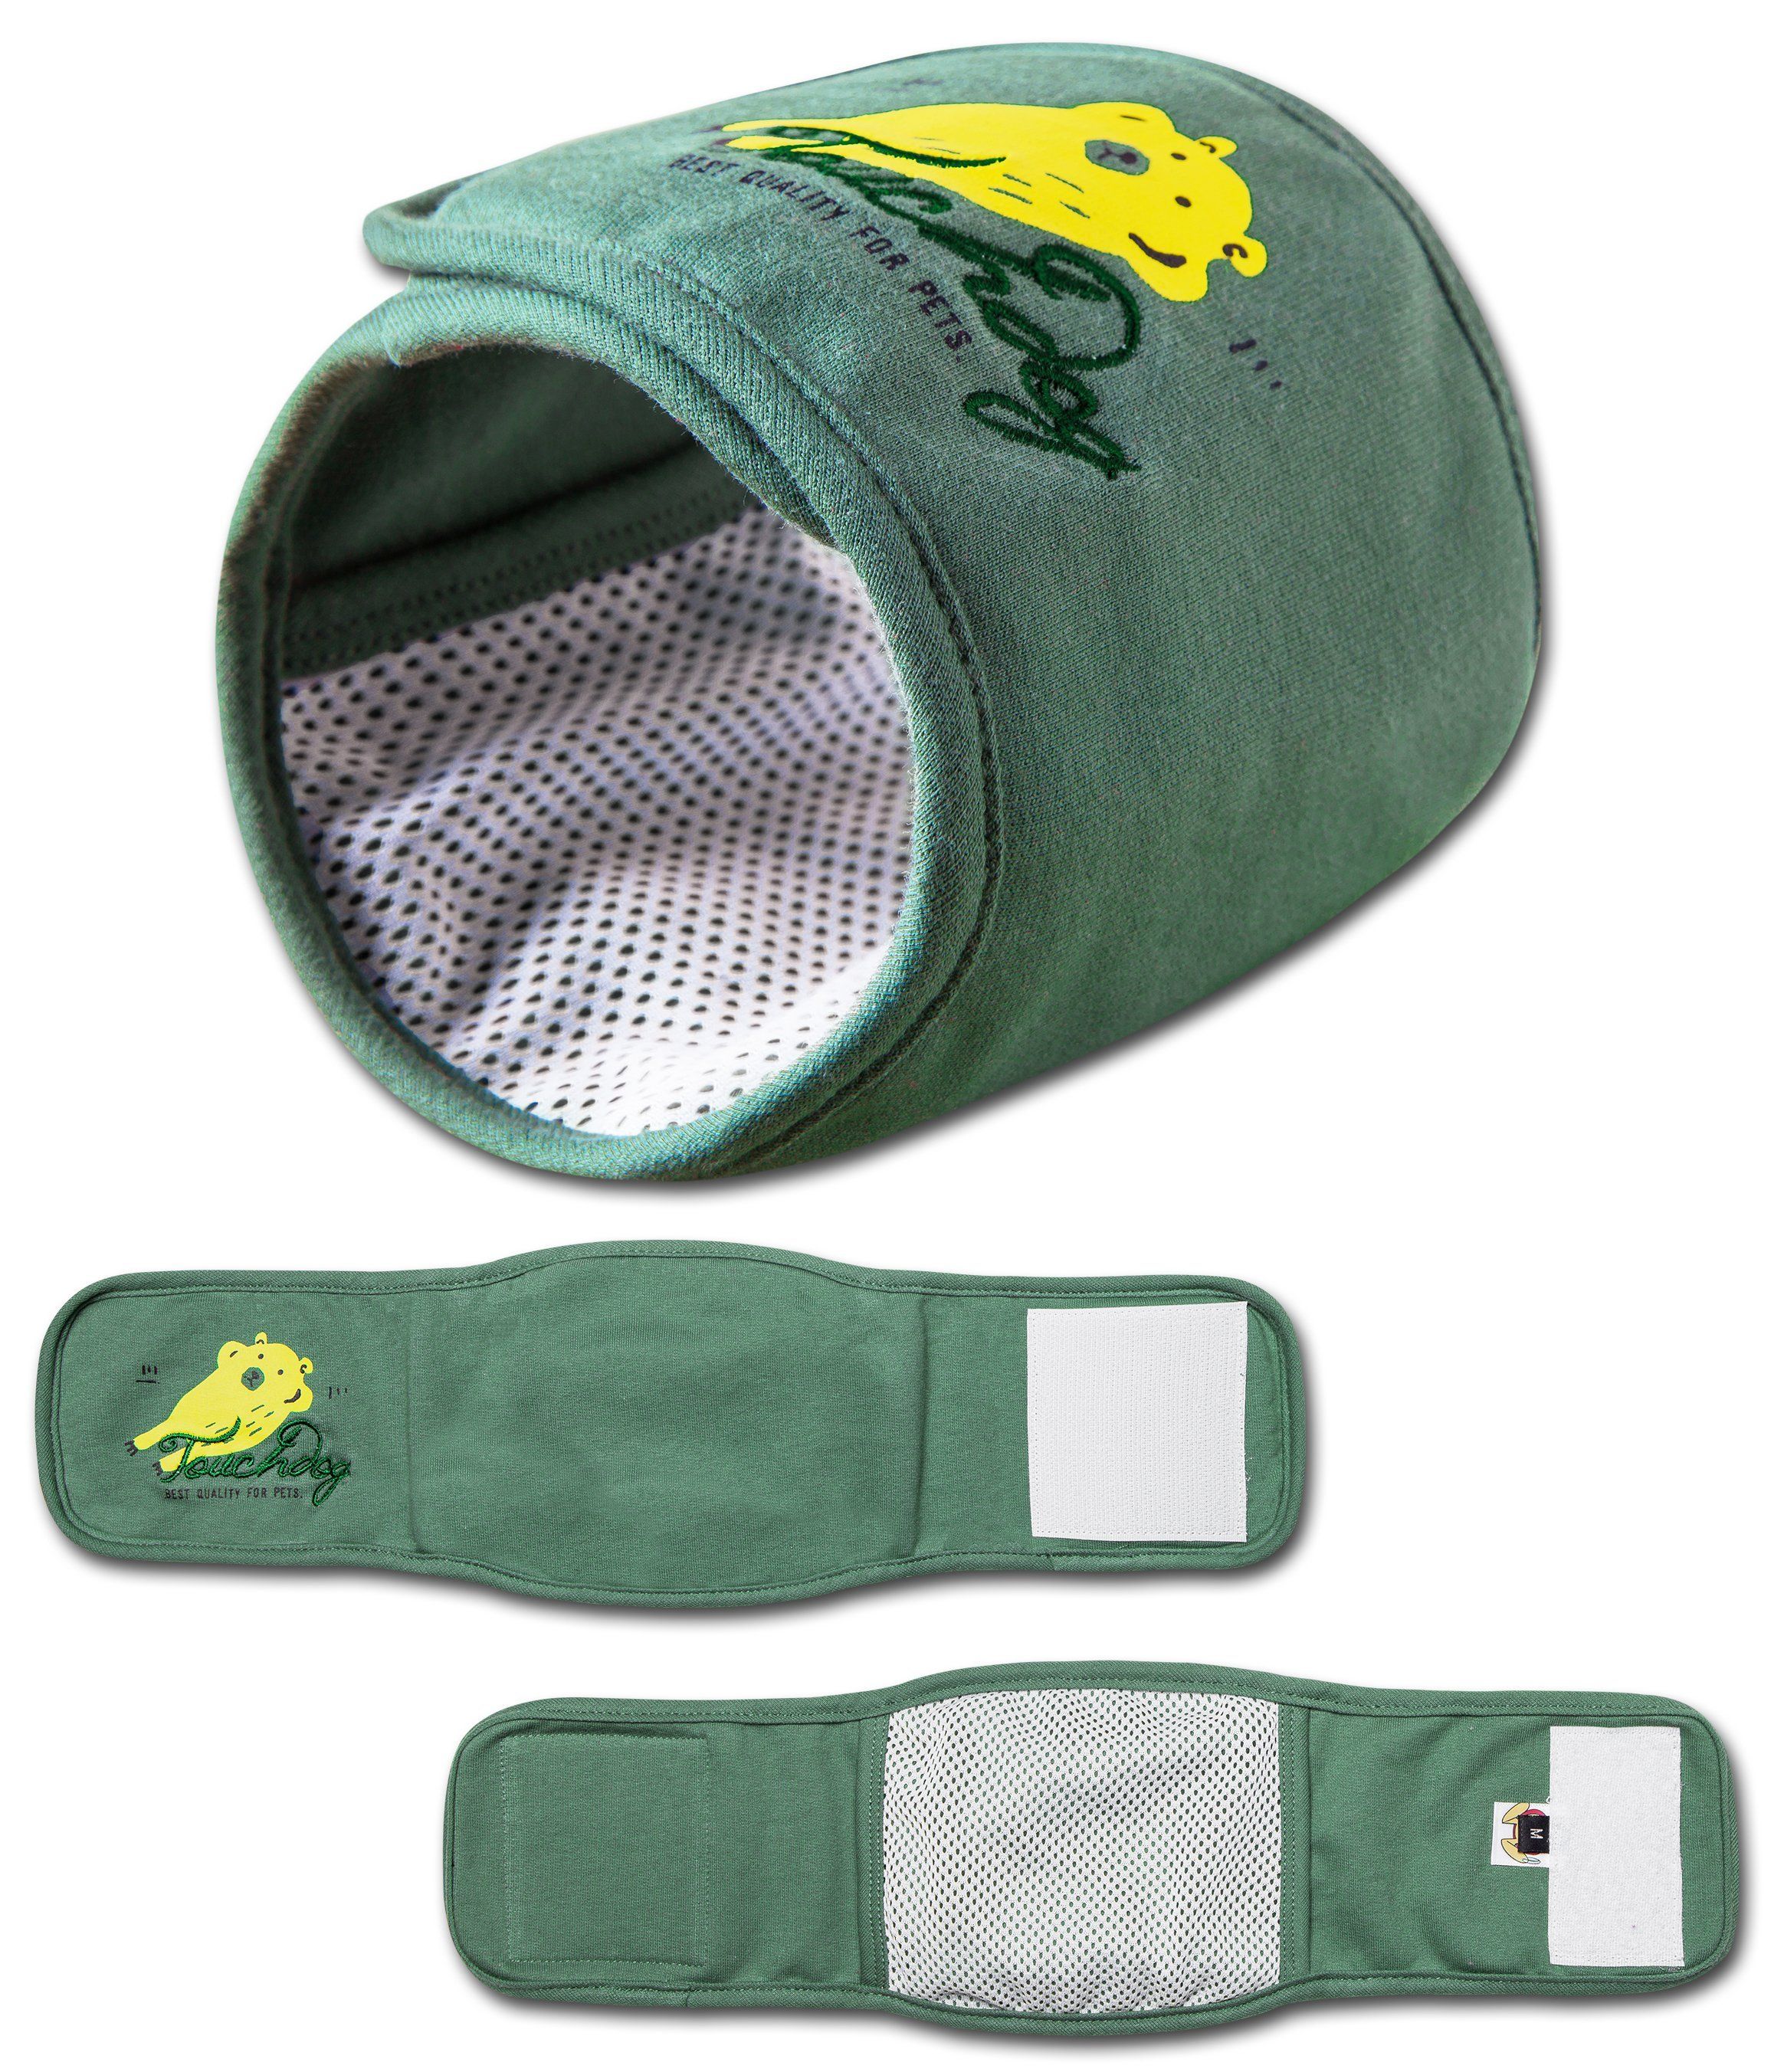 Touchdog Gauze-Aid Protective Dog Bandage and Calming Compression Sleeve Small Green